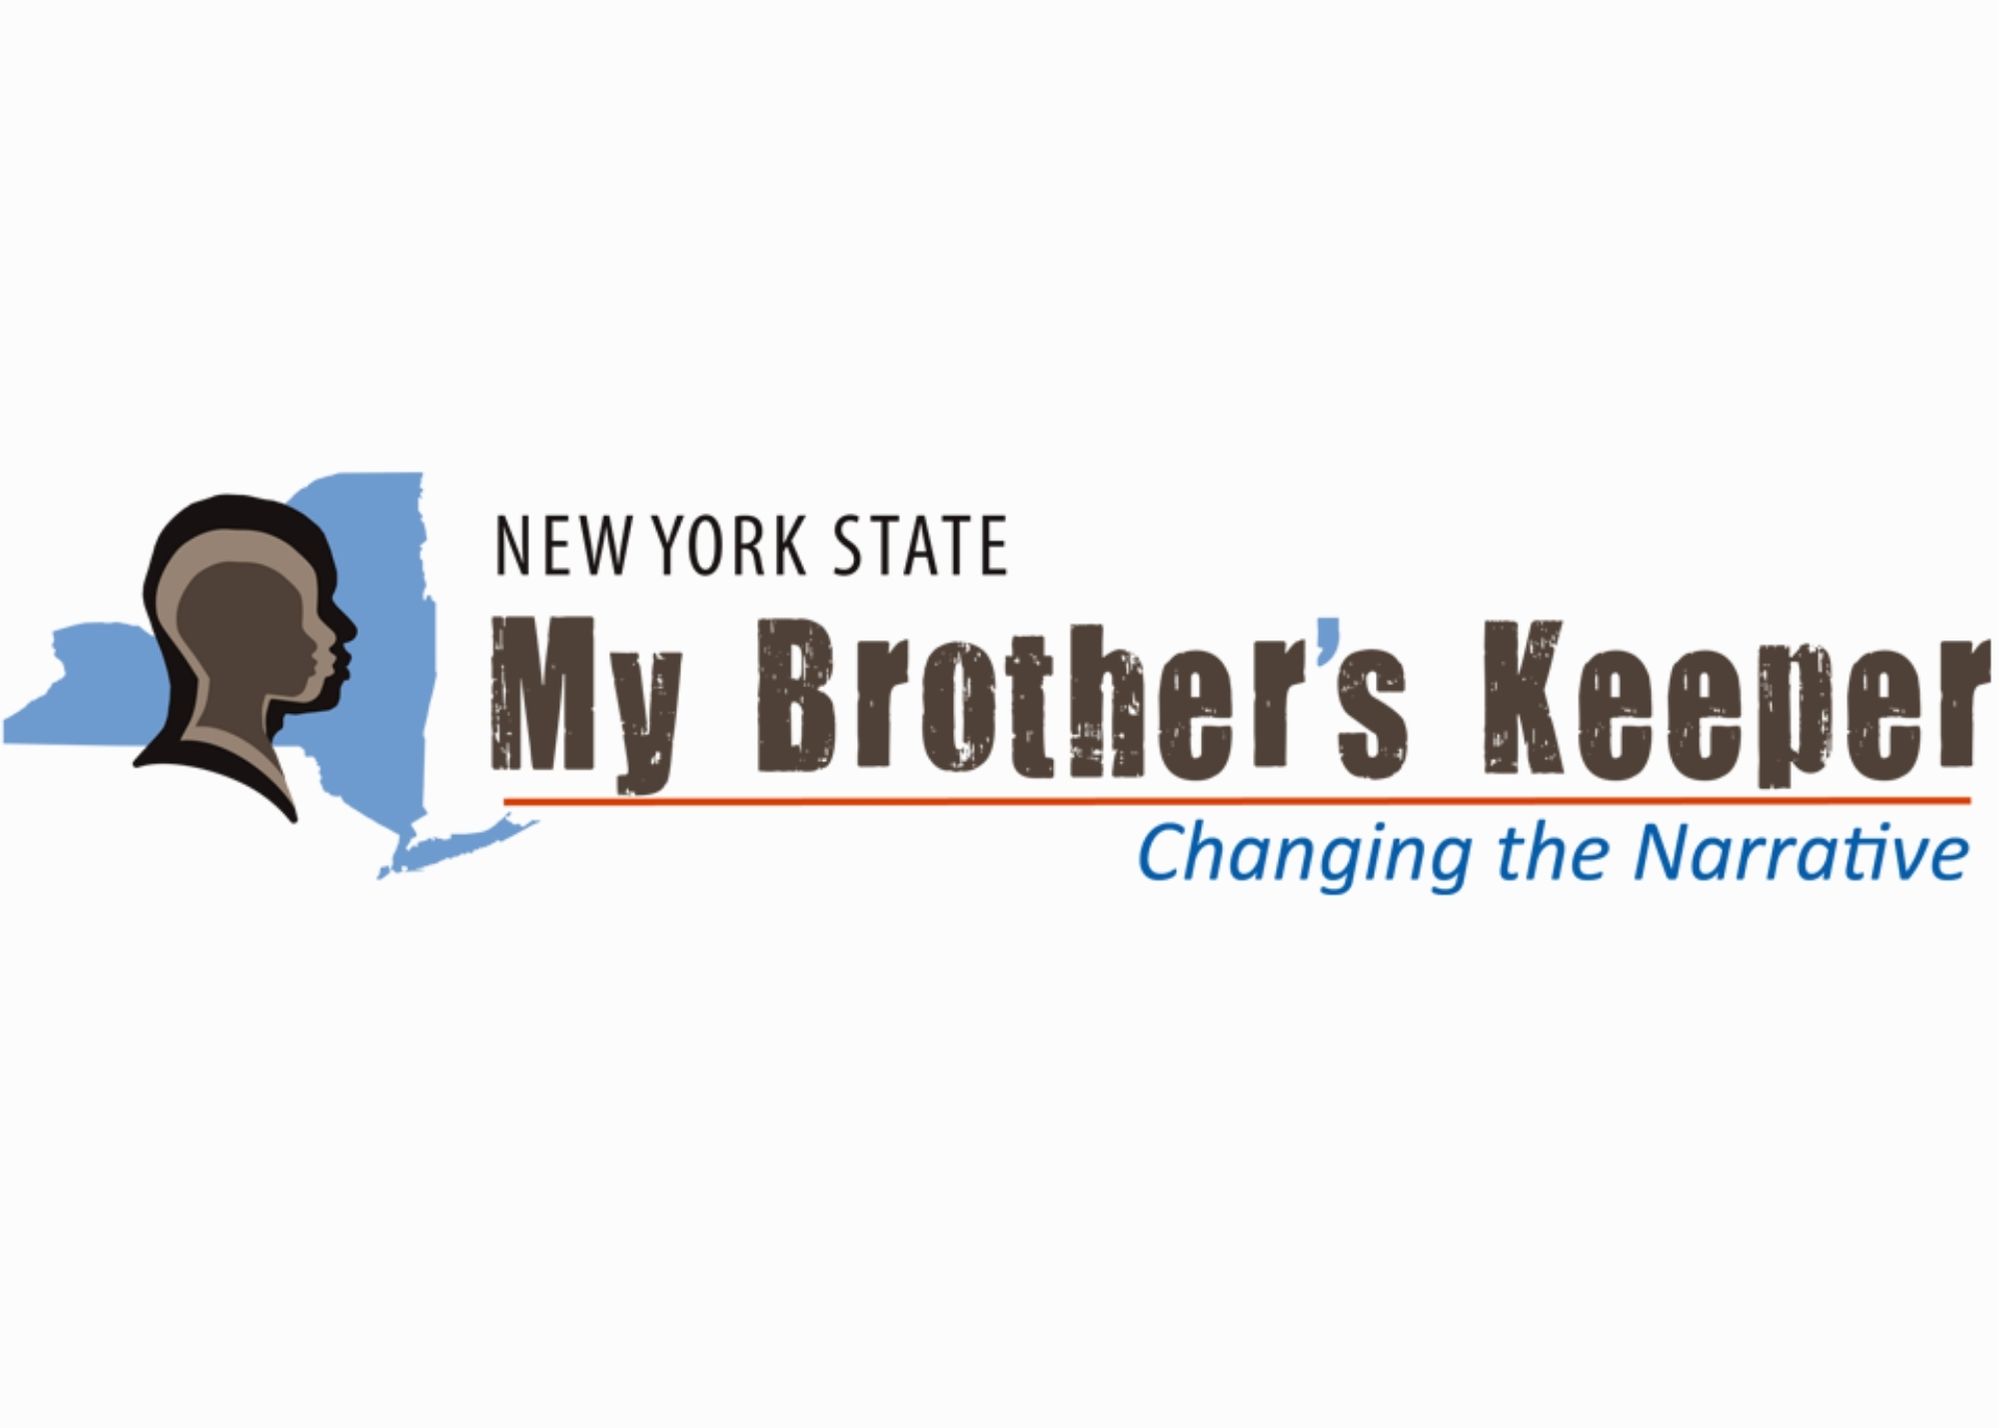 My Brother's Keeper - Changing the Narrative